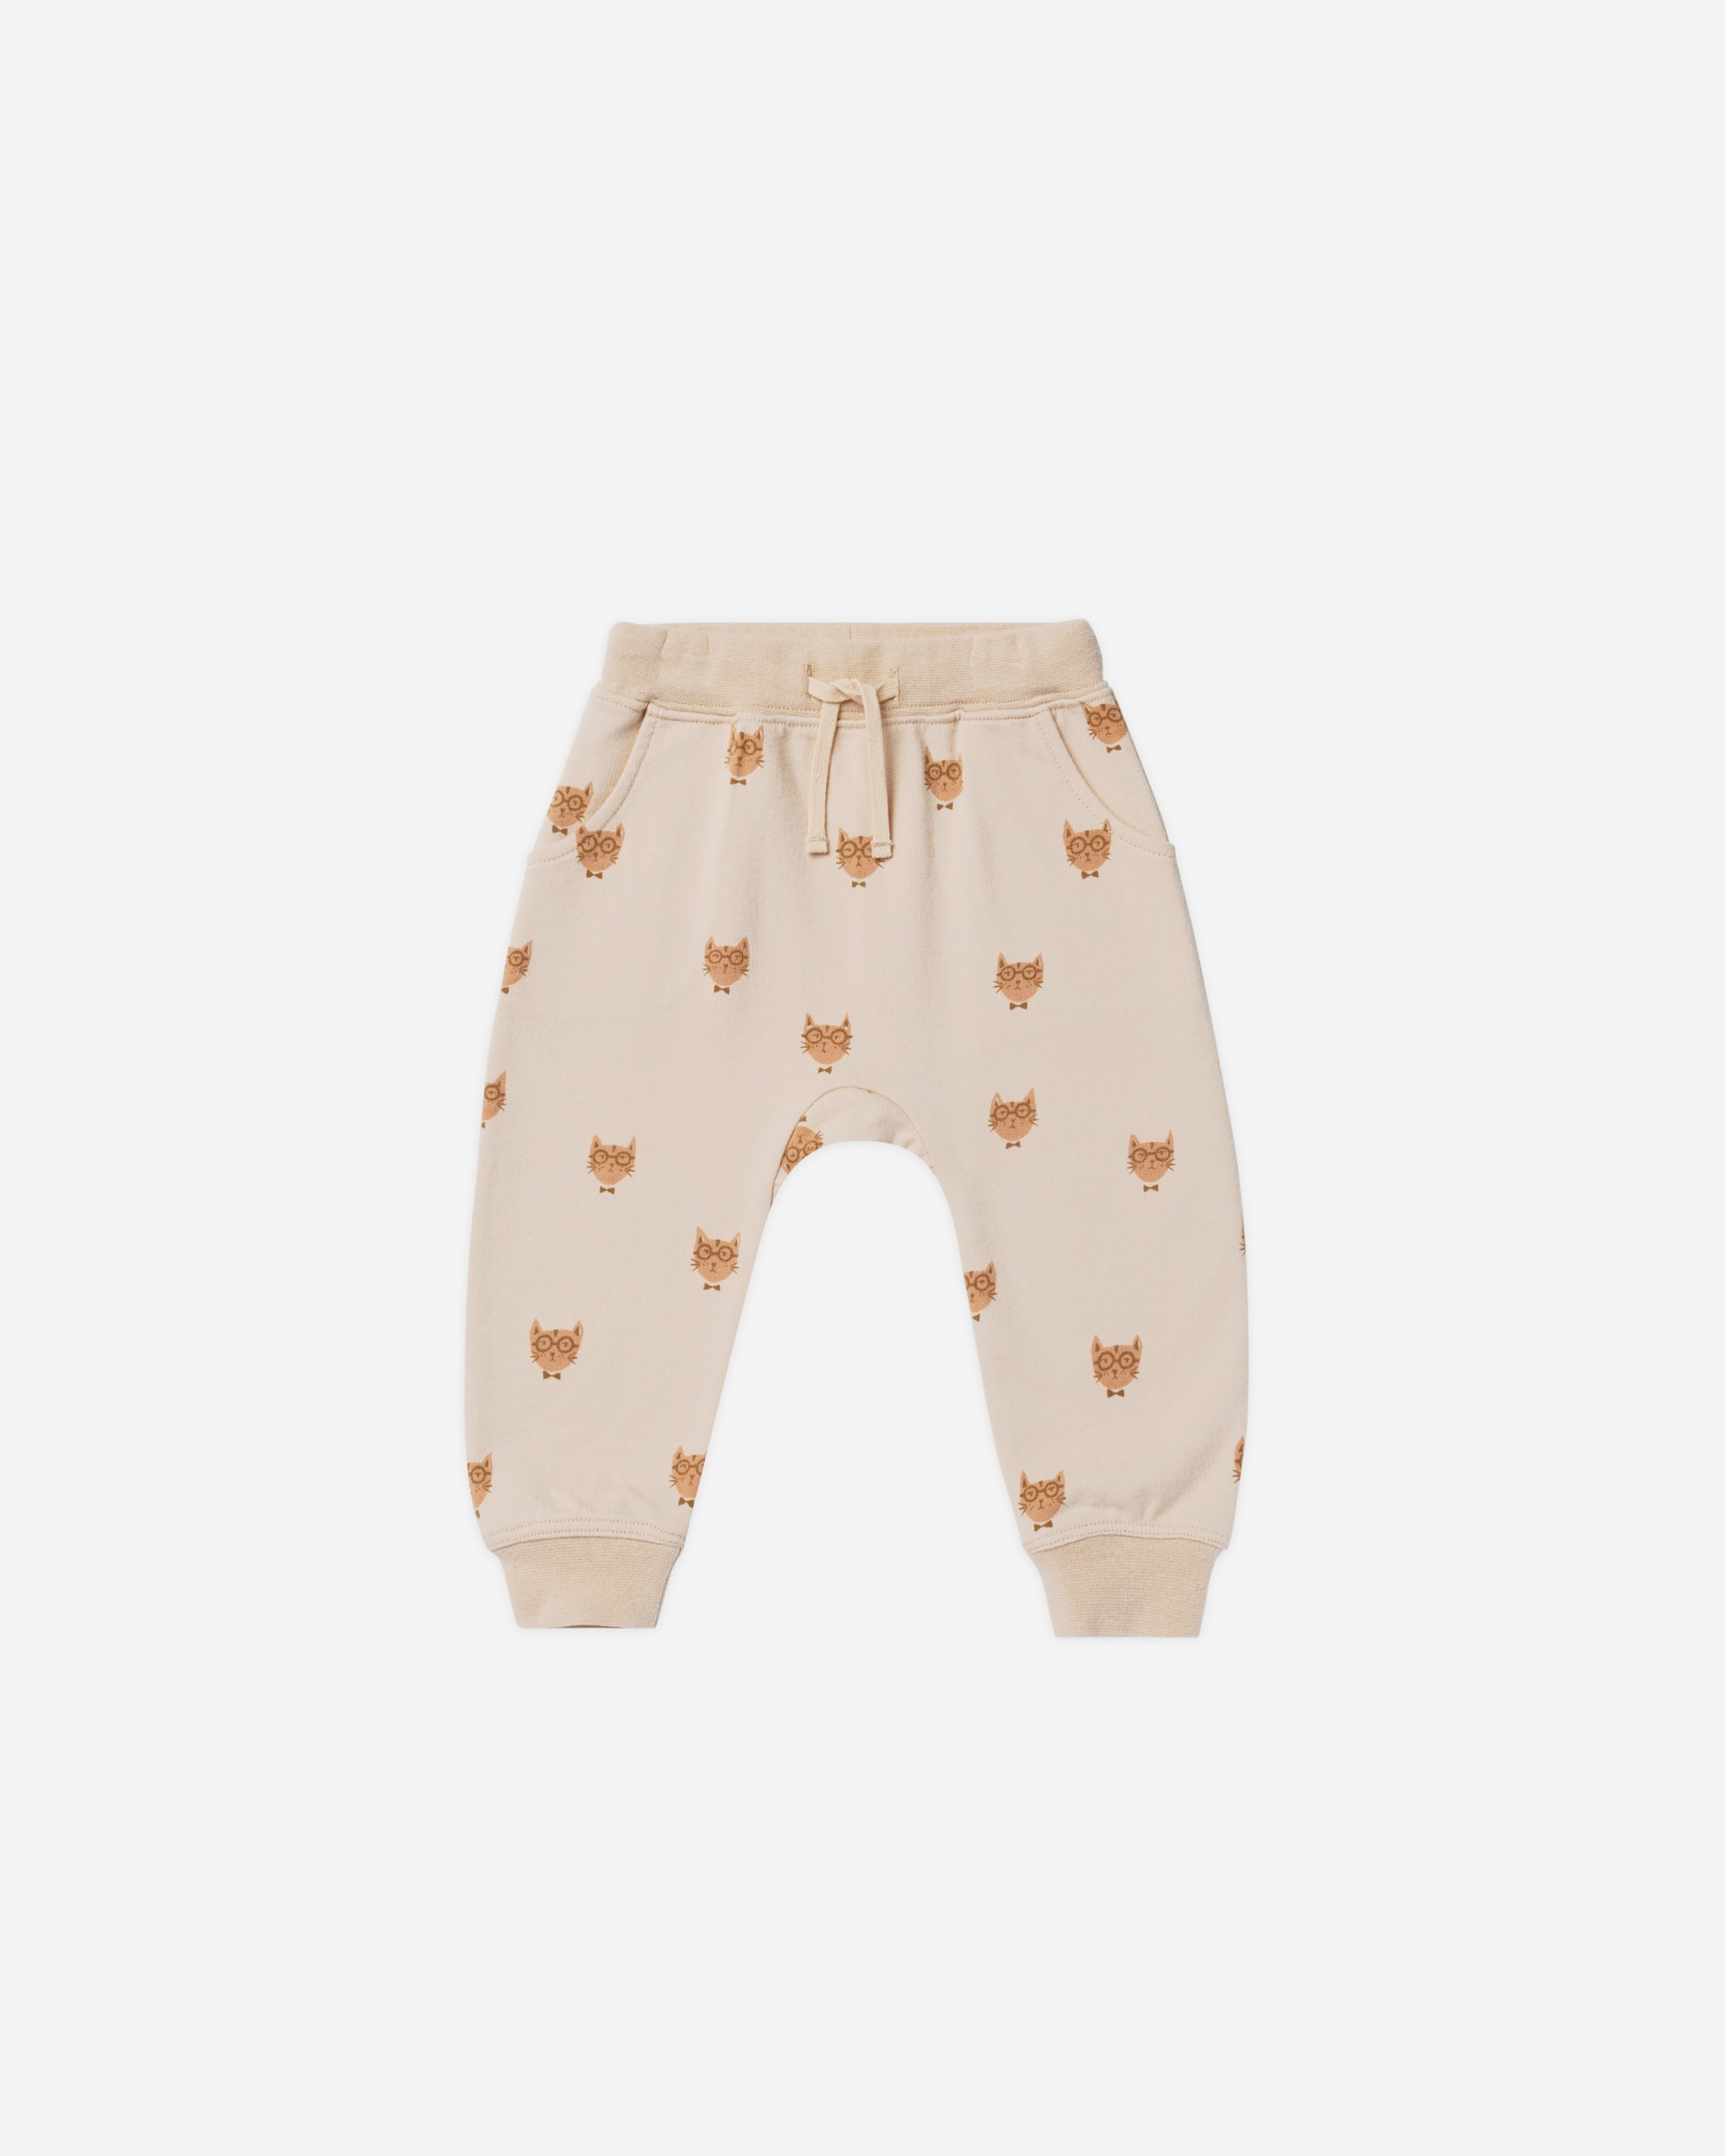 Sweatpants || Cool Cat - Rylee + Cru | Kids Clothes | Trendy Baby Clothes | Modern Infant Outfits |